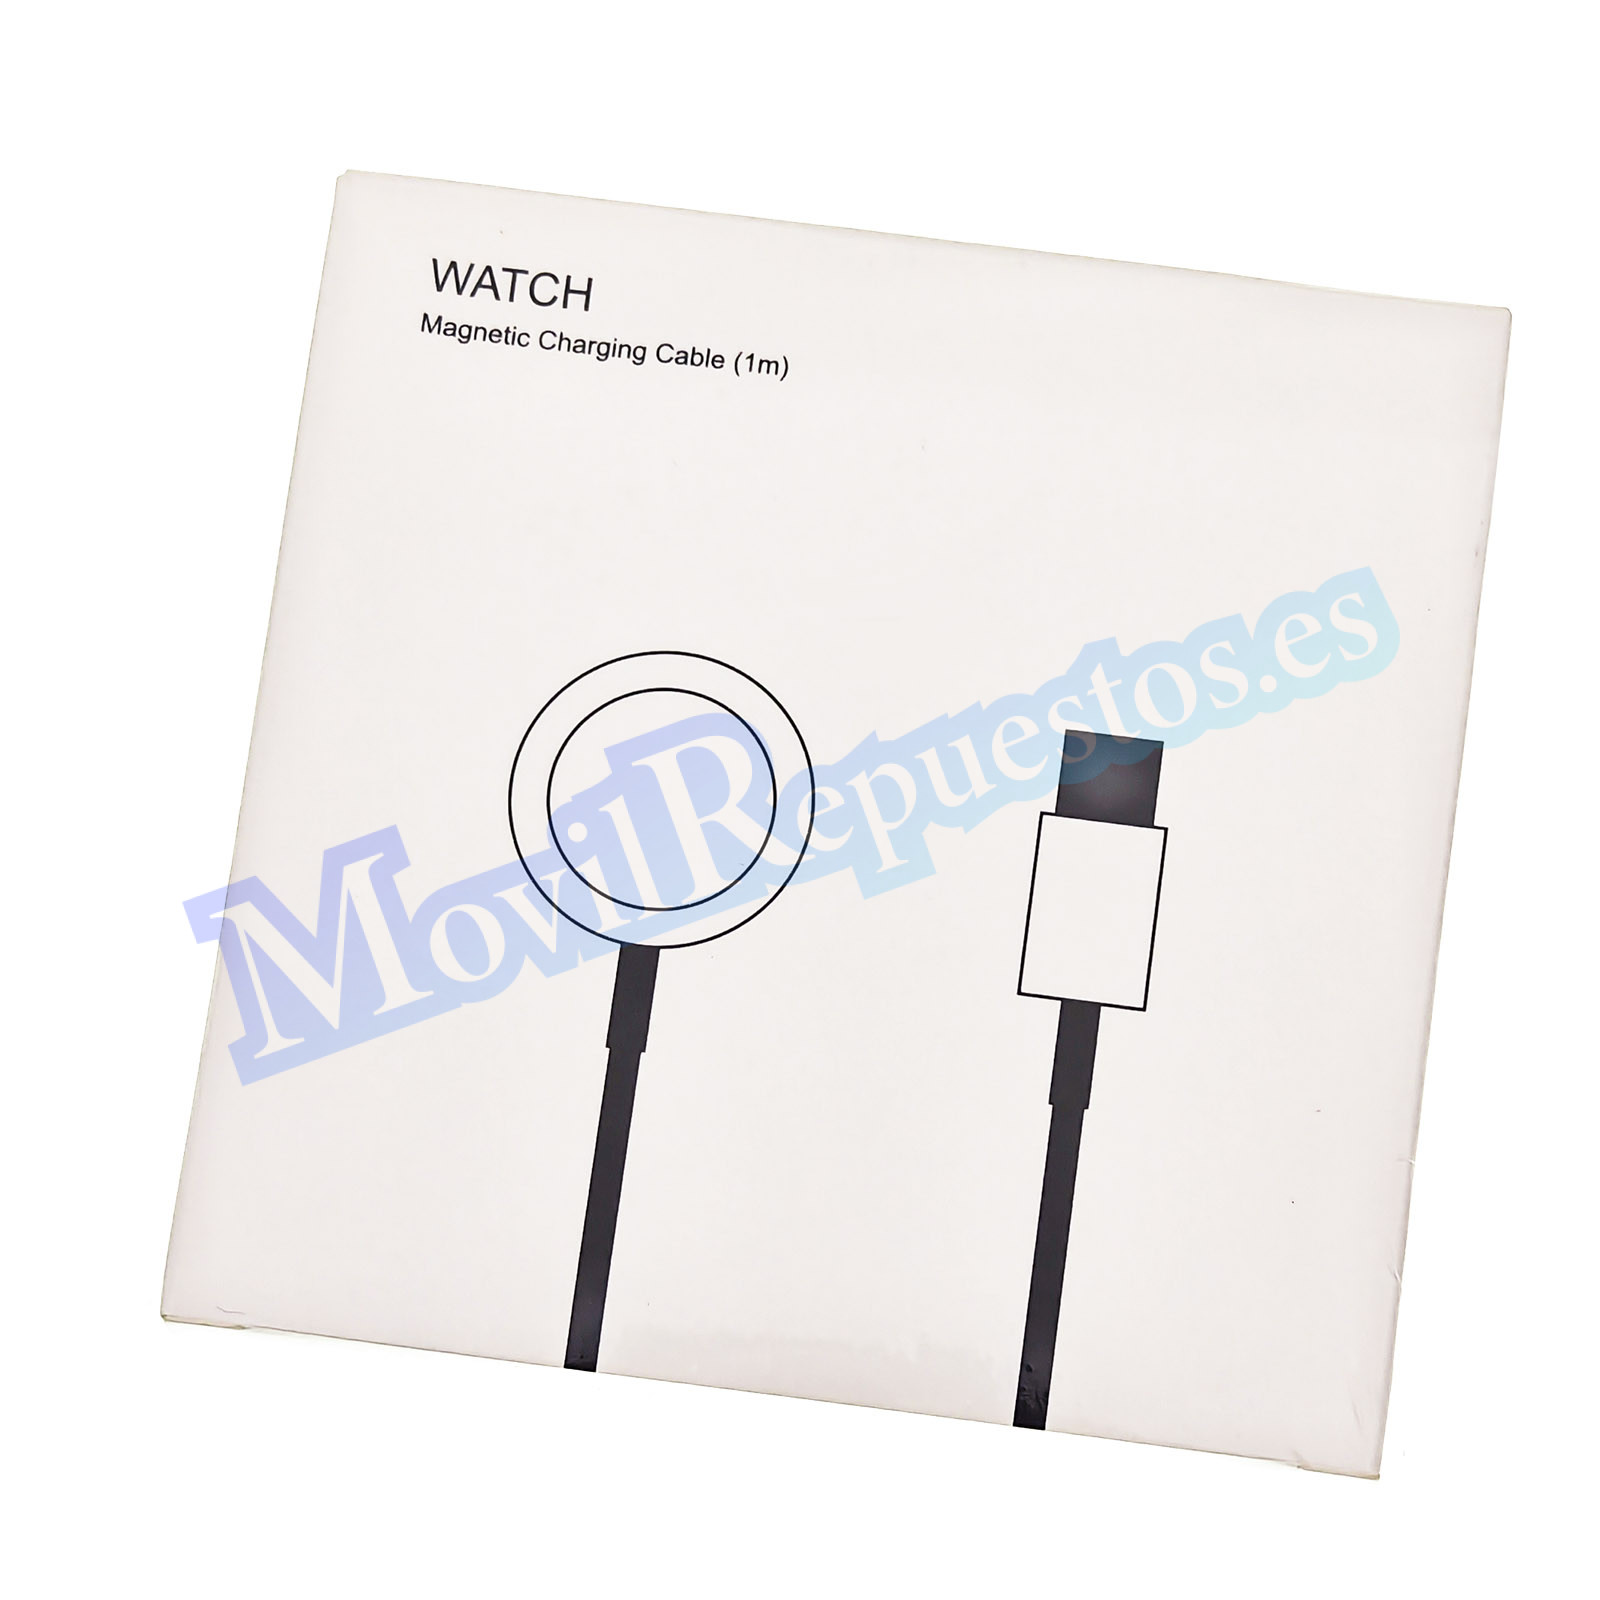 MAGNETIC CHAGING CABLE